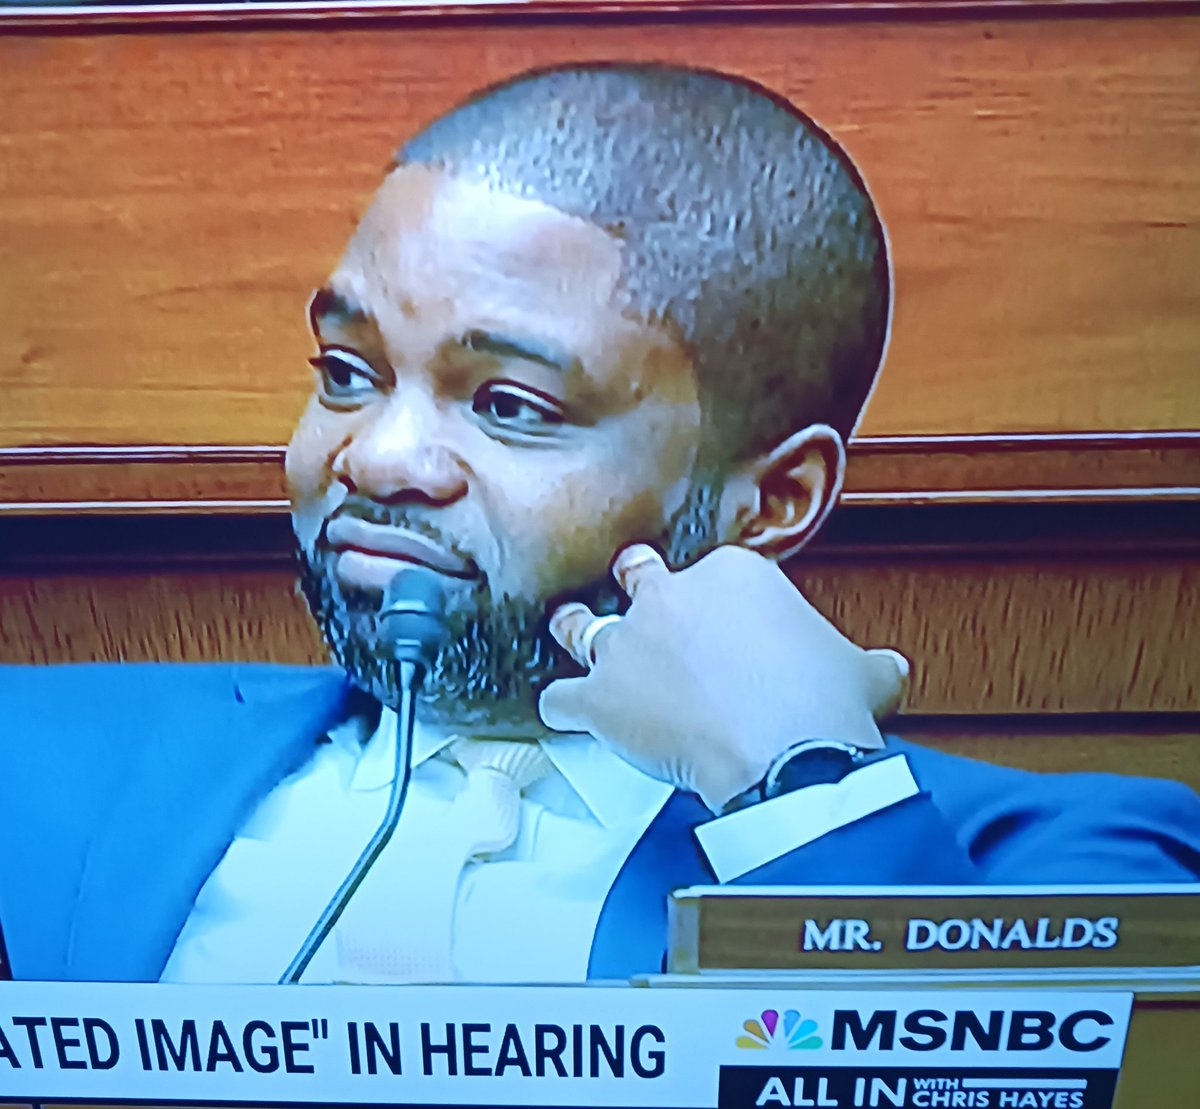 Florida MAGAt apprentice Bryon Donalds tried to submit fabricated 'text image' in a Congressional Impeachment Inquiry today.

He's seen here trying to disappear into the paneling with that stupid embarrassed 'I done got caught' look on his face, as #AOC exposes him for filth.